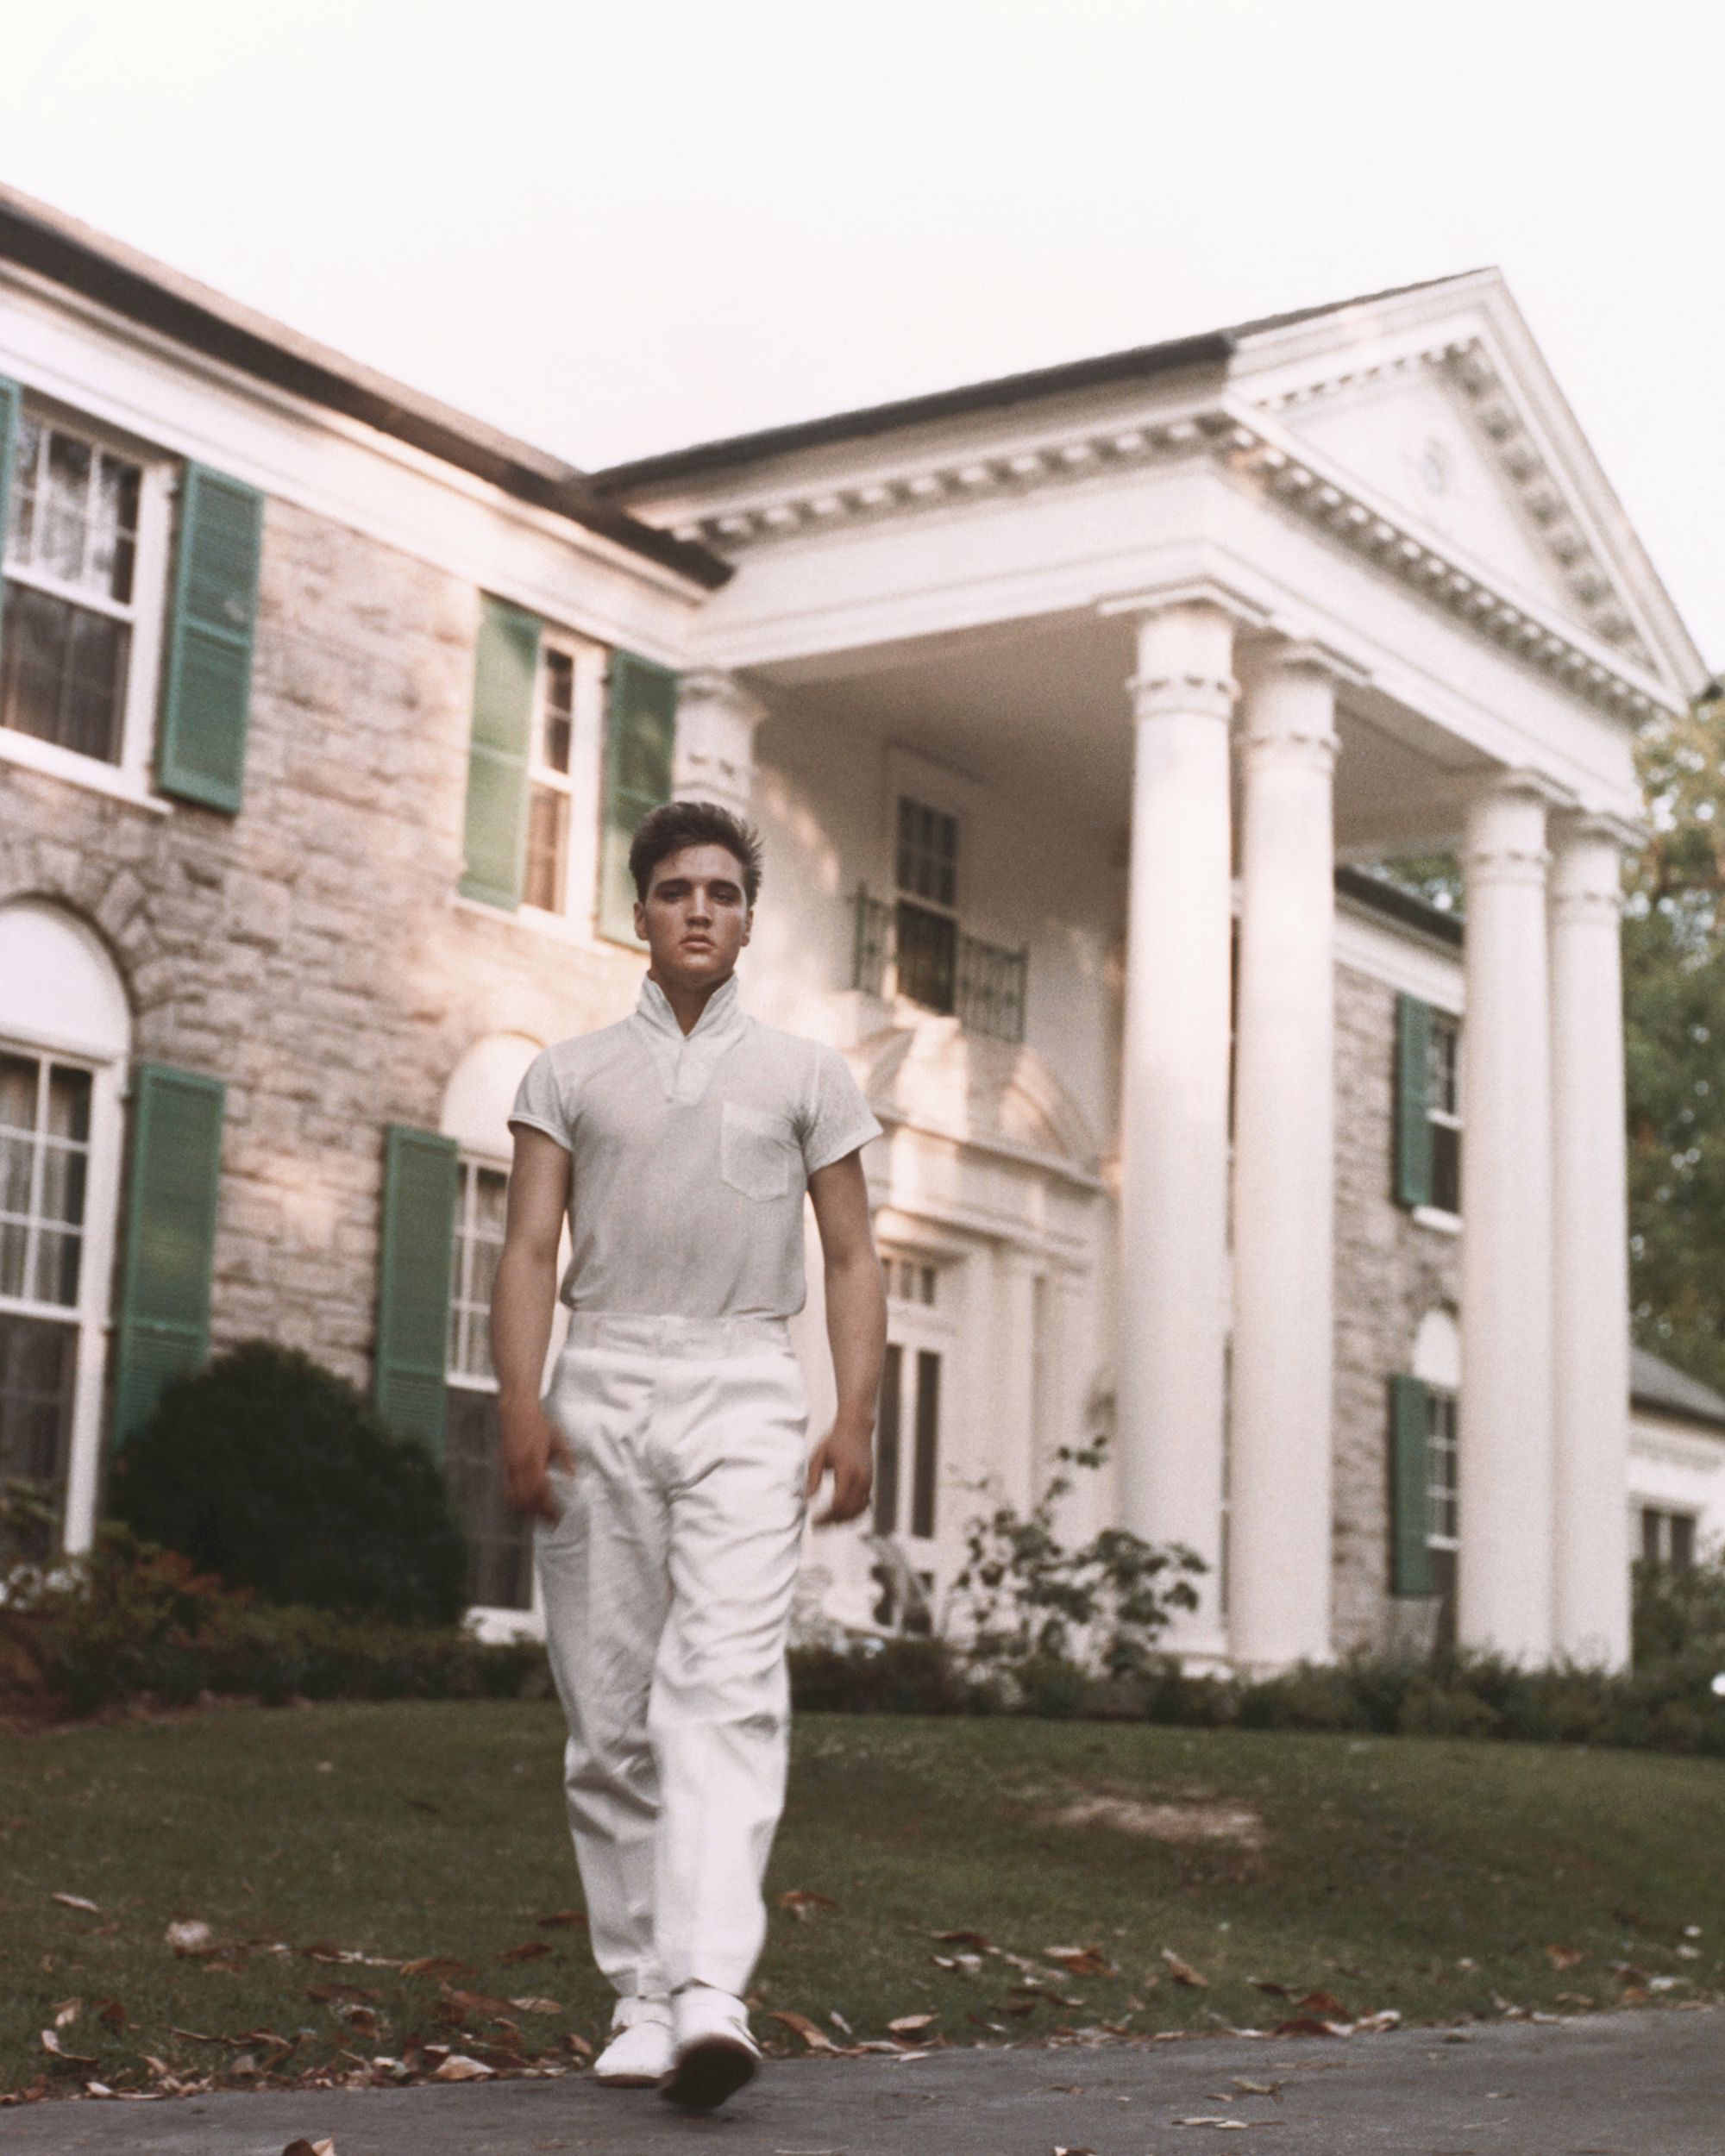 <p>When Elvis bought the house, it was already called Graceland. It was named after the original owner's daughter, Grace, who inherited the property after her parents died and later passed it on to her niece, who sold it to Elvis.</p><p><b>Related:</b> <a href="https://blog.cheapism.com/virtual-famous-home-tour/">19 Virtual Tours of Famous Homes</a></p>